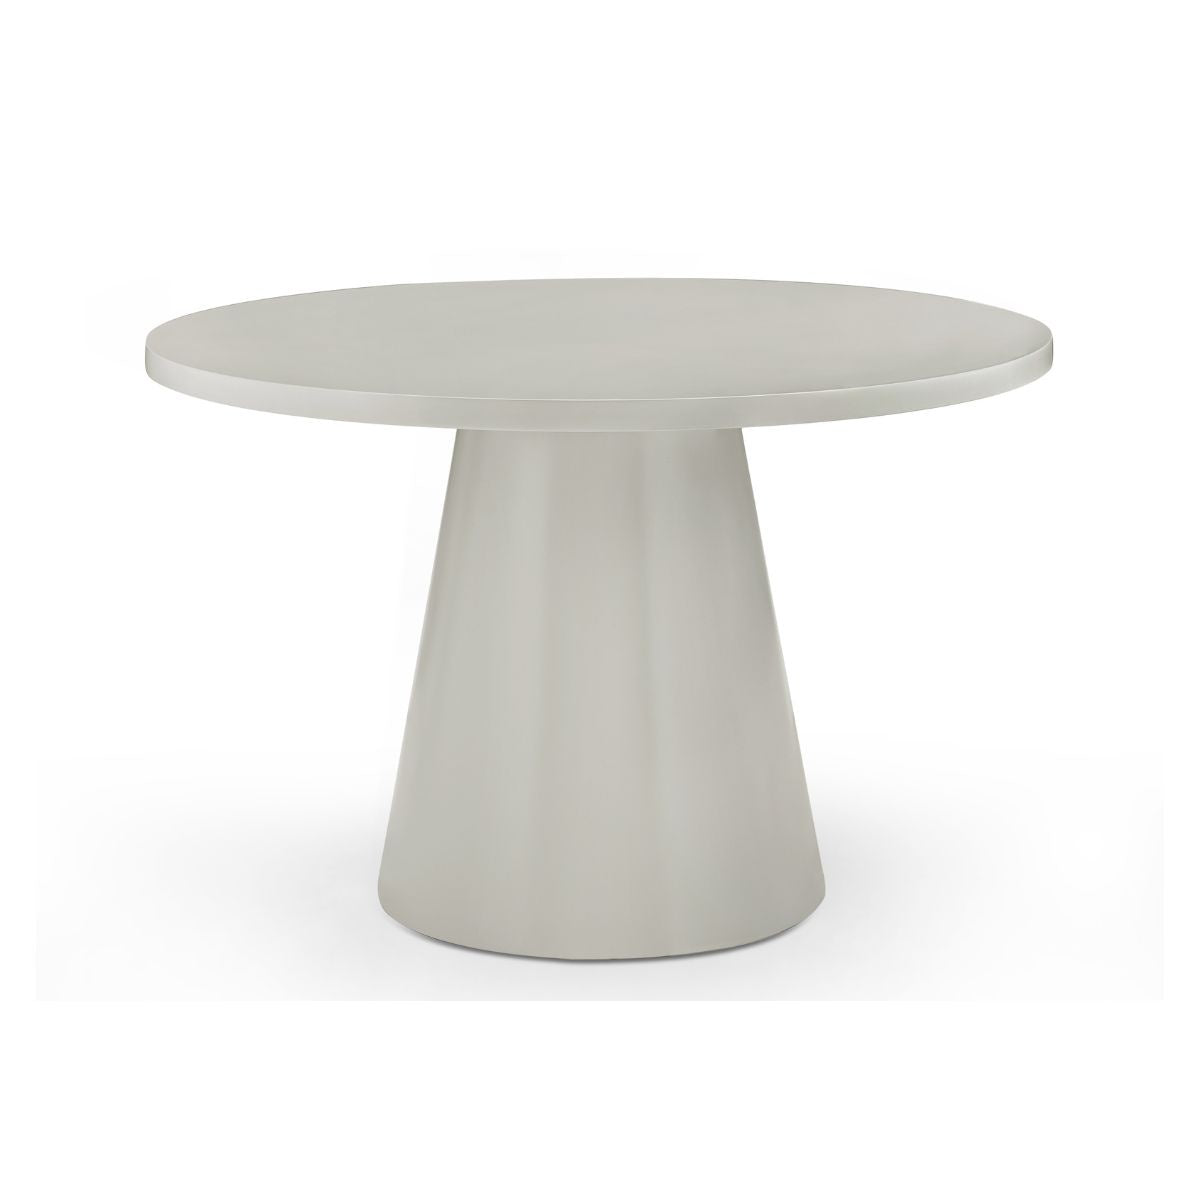 Asher 4 Seater Round Dining Table